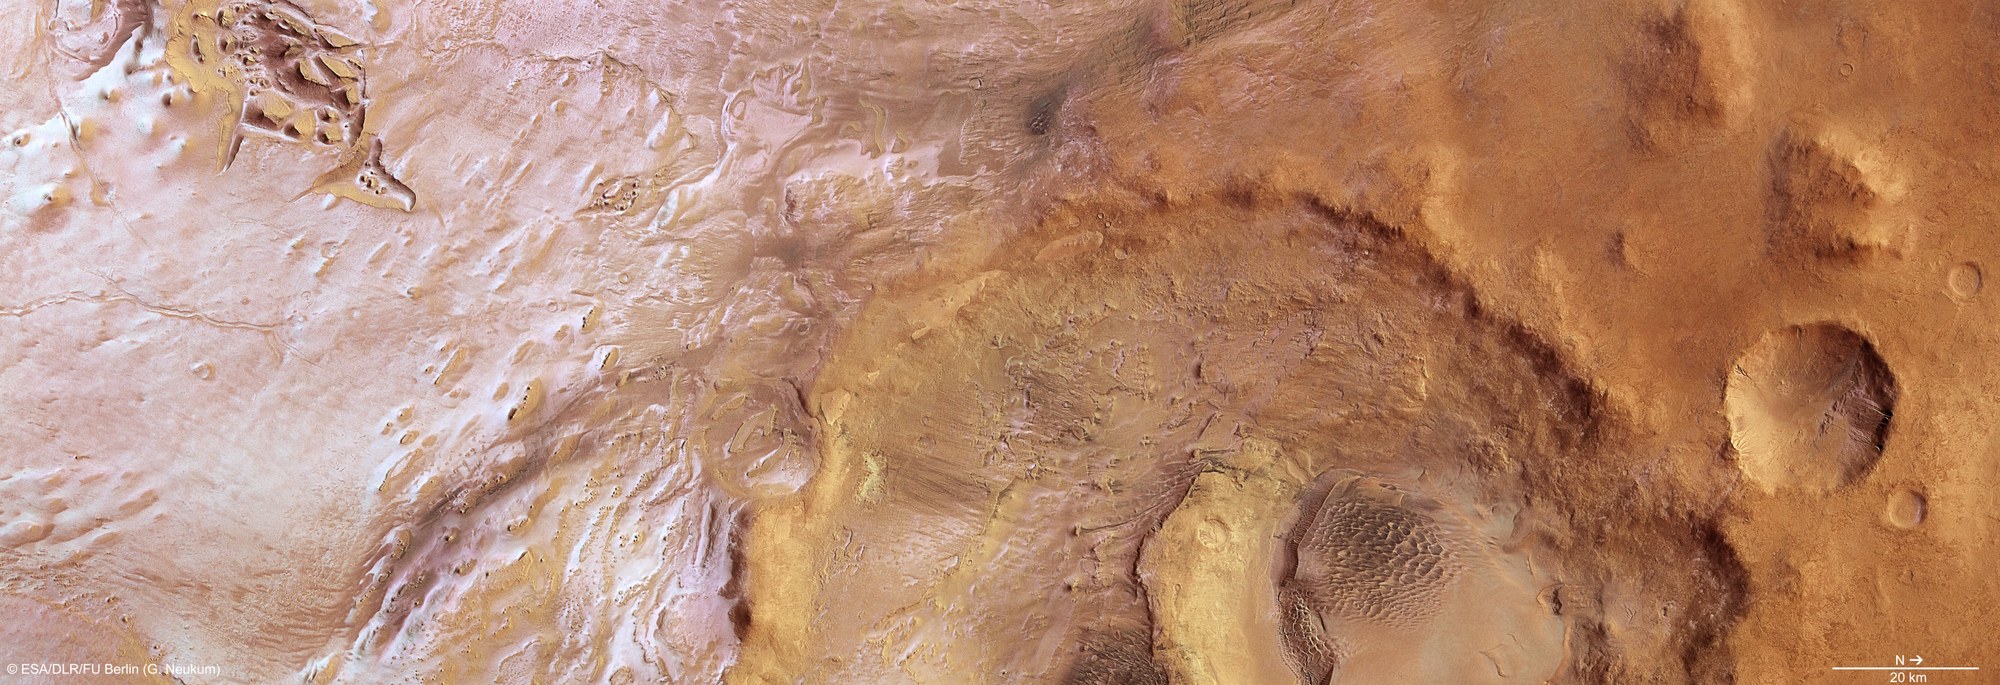 Colour plan view of Hooke Crater